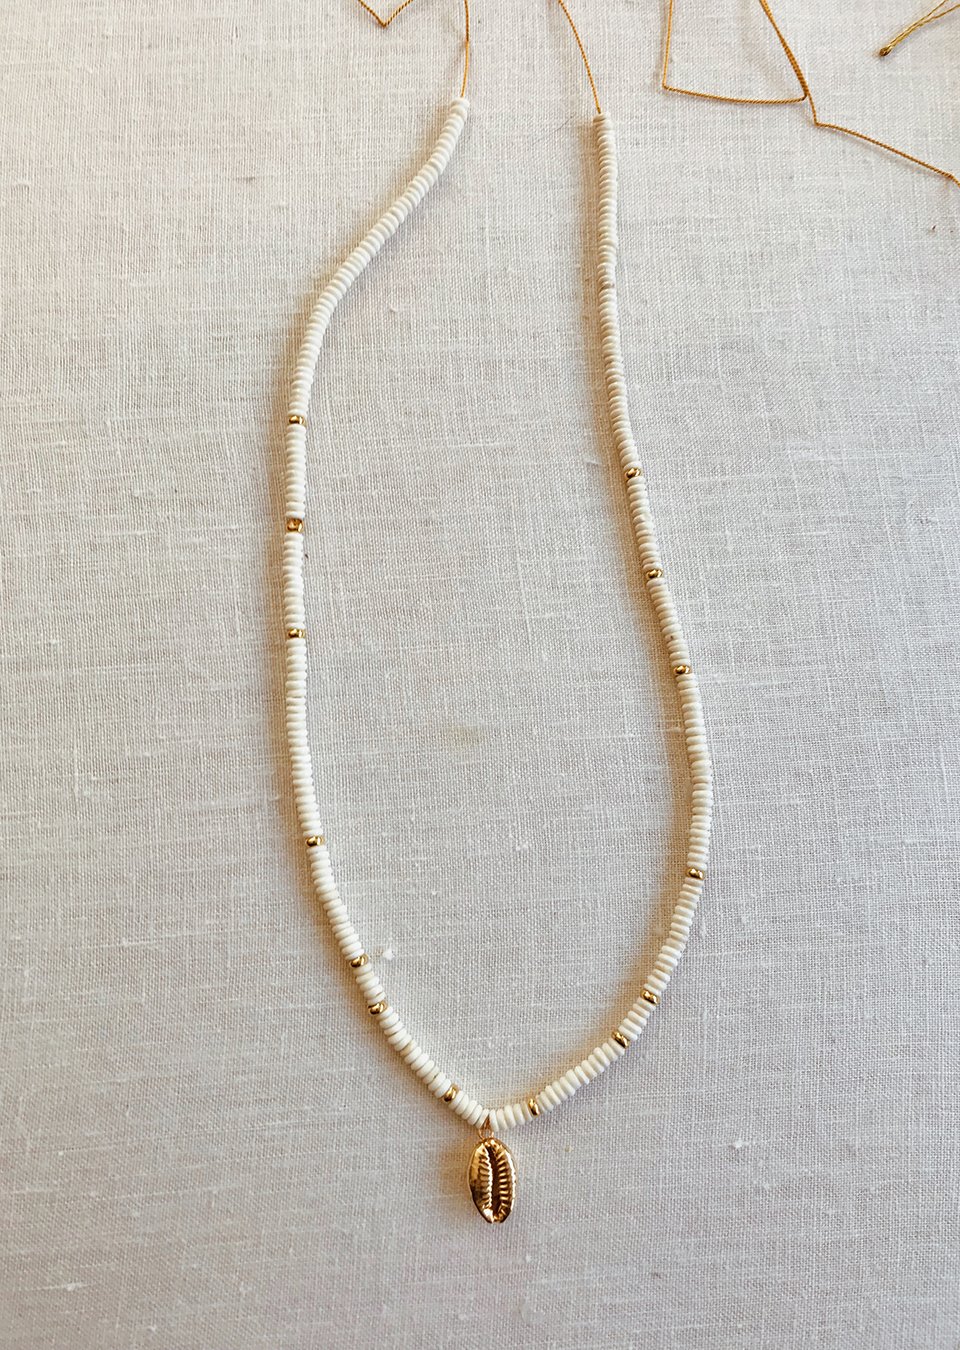 Shell Necklace with Beads